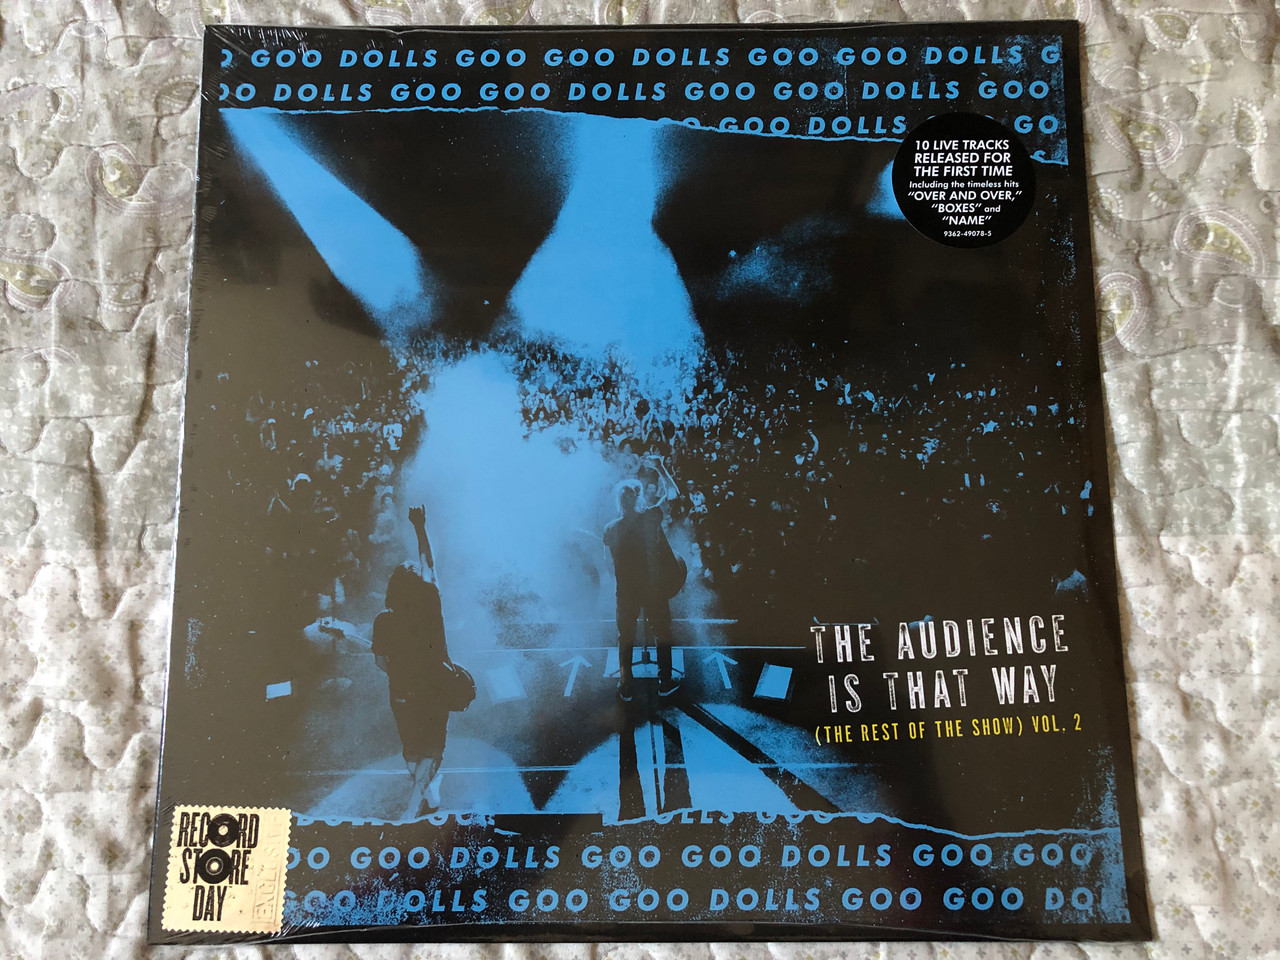 https://cdn10.bigcommerce.com/s-62bdpkt7pb/products/0/images/270756/Goo_Goo_Dolls_The_Audience_Is_That_Way_The_Rest_of_the_Show_Vol._2_10_Live_Tracks_Released_For_The_First_Time_Including_the_timeless_hits_Over_And_Over_Boxes_and_Name_War_1__98442.1679929841.1280.1280.JPG?c=2&_gl=1*my5gvm*_ga*MjA2NTIxMjE2MC4xNTkwNTEyNTMy*_ga_WS2VZYPC6G*MTY3OTkyNDgwNS44MjIuMS4xNjc5OTI5NTQ4LjU2LjAuMA..